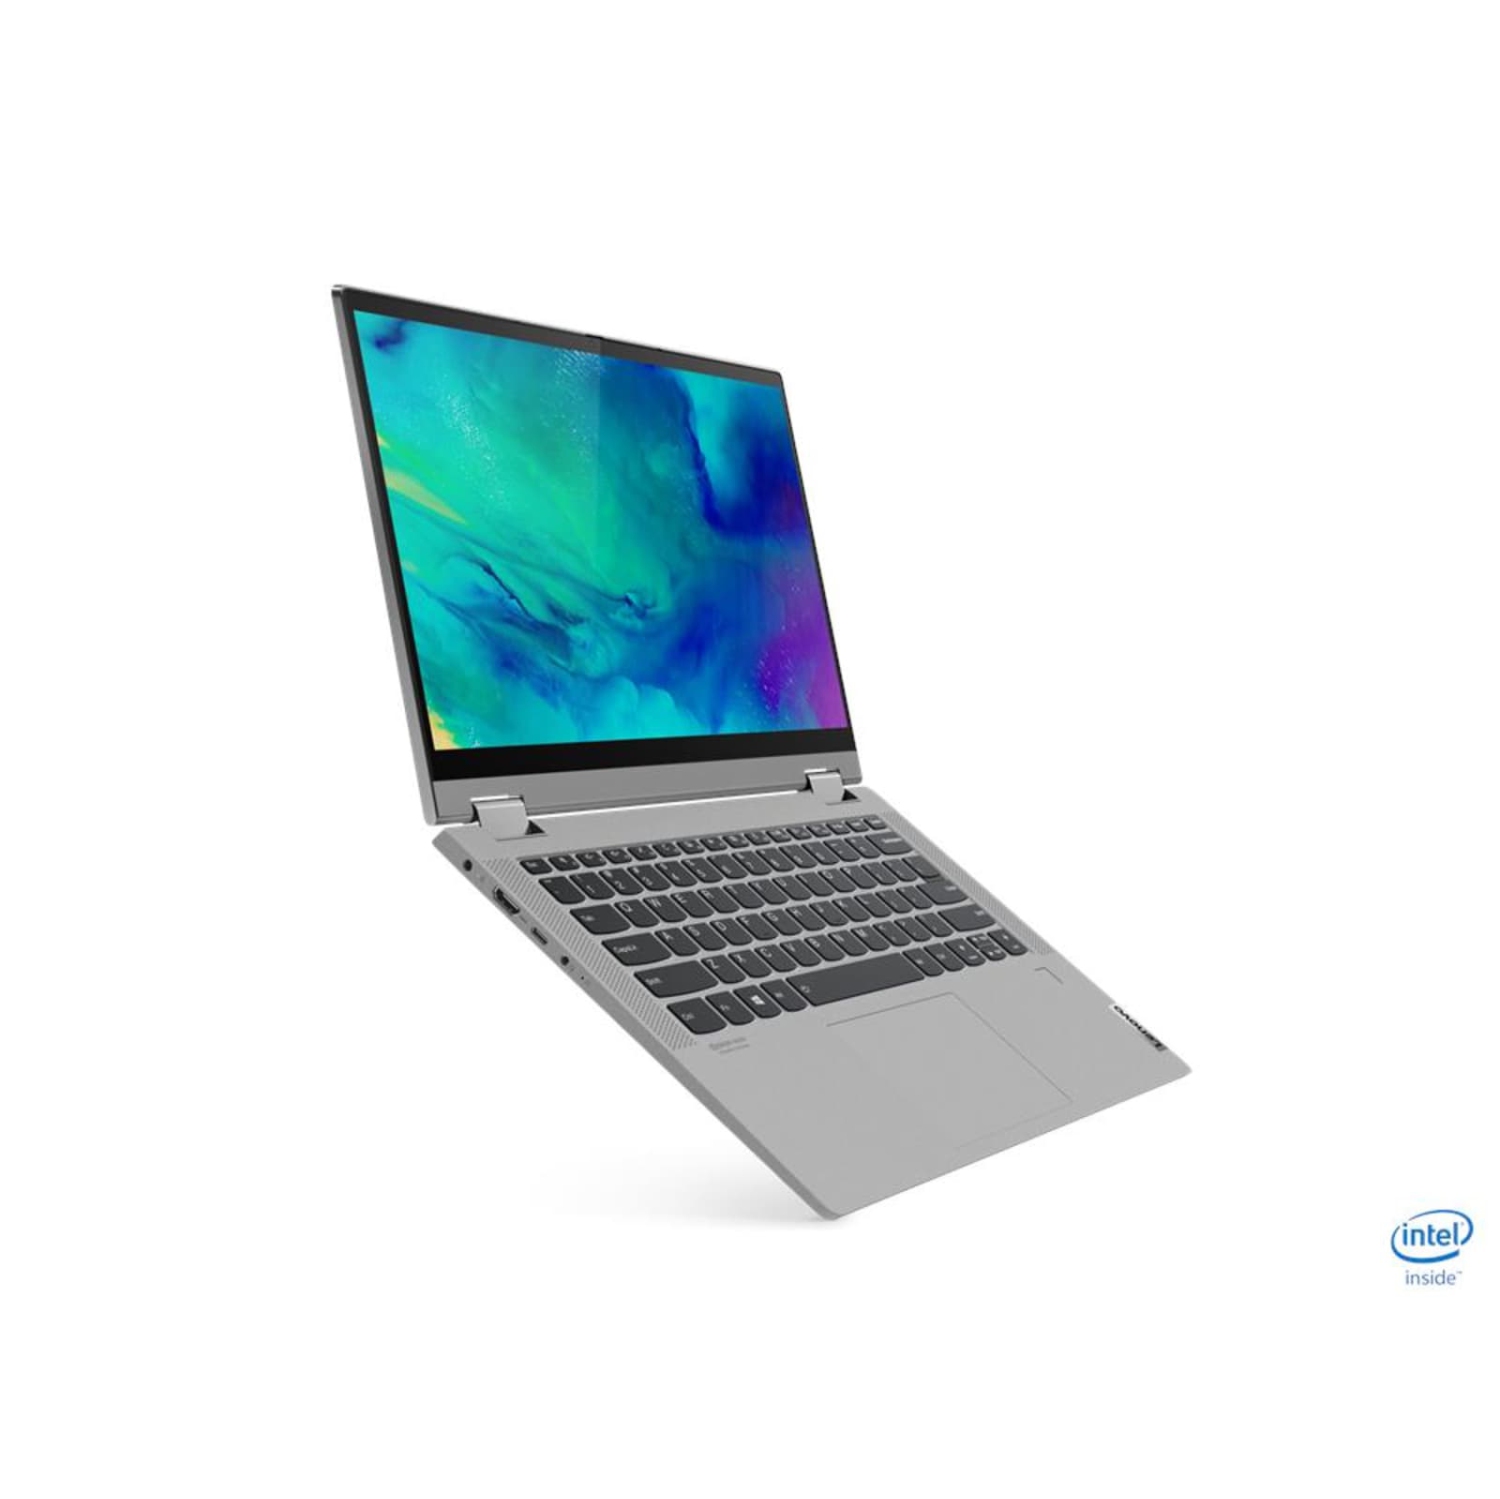 Refurbished (Excellent) Lenovo IdeaPad Flex 5 14ITL05 2-in-1 Laptop | 14" 1920x1080 FHD | Core i3-1115G4 - 128GB SSD Hard Drive - 4GB RAM | 2 cores @ 4.1 GHz Win 11 Home Silver